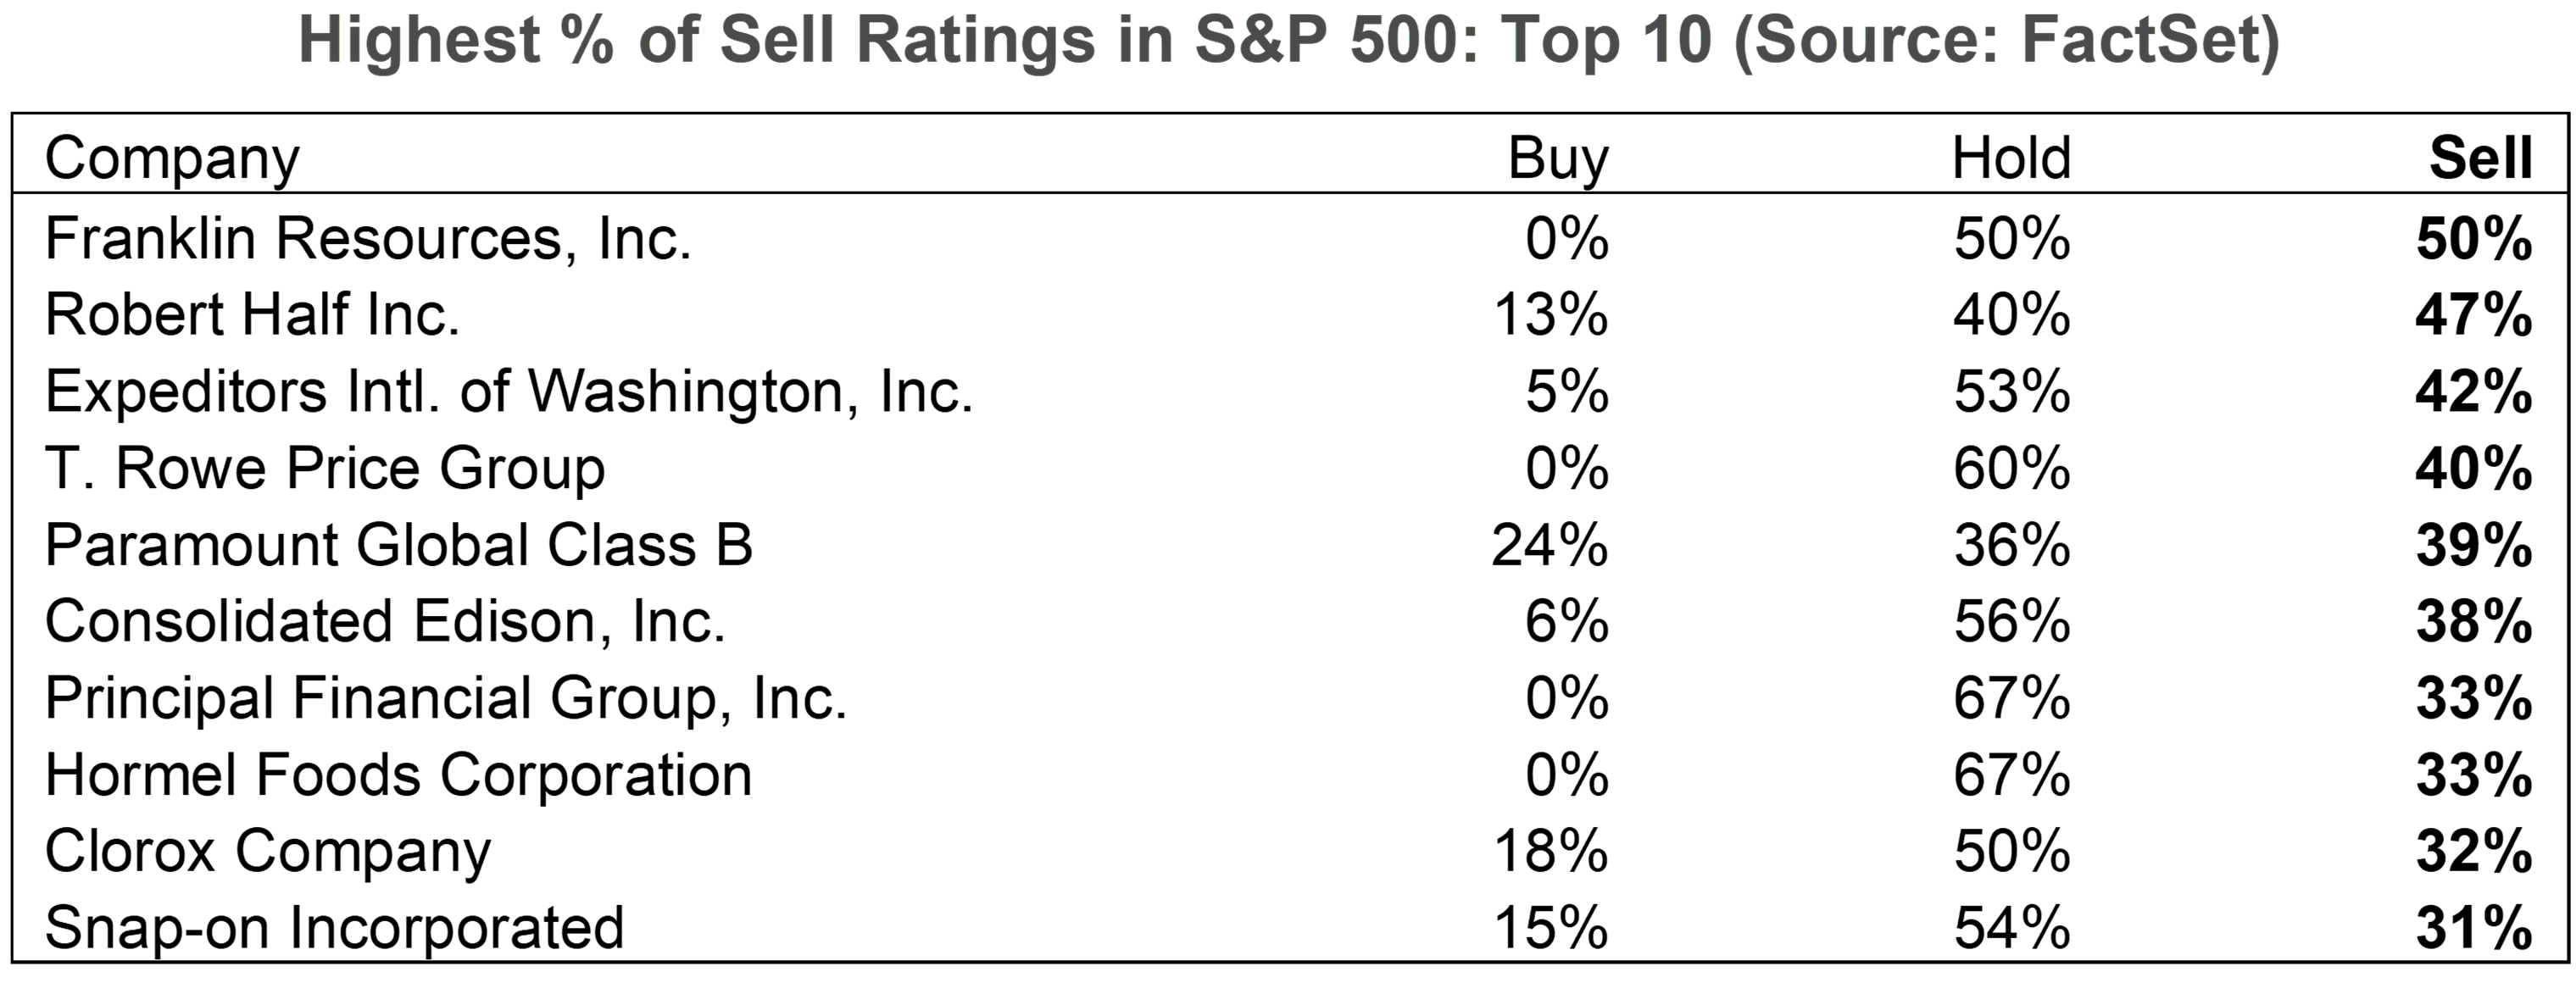 10 Stocks Analysts Are Most Optimistic About: FactSet